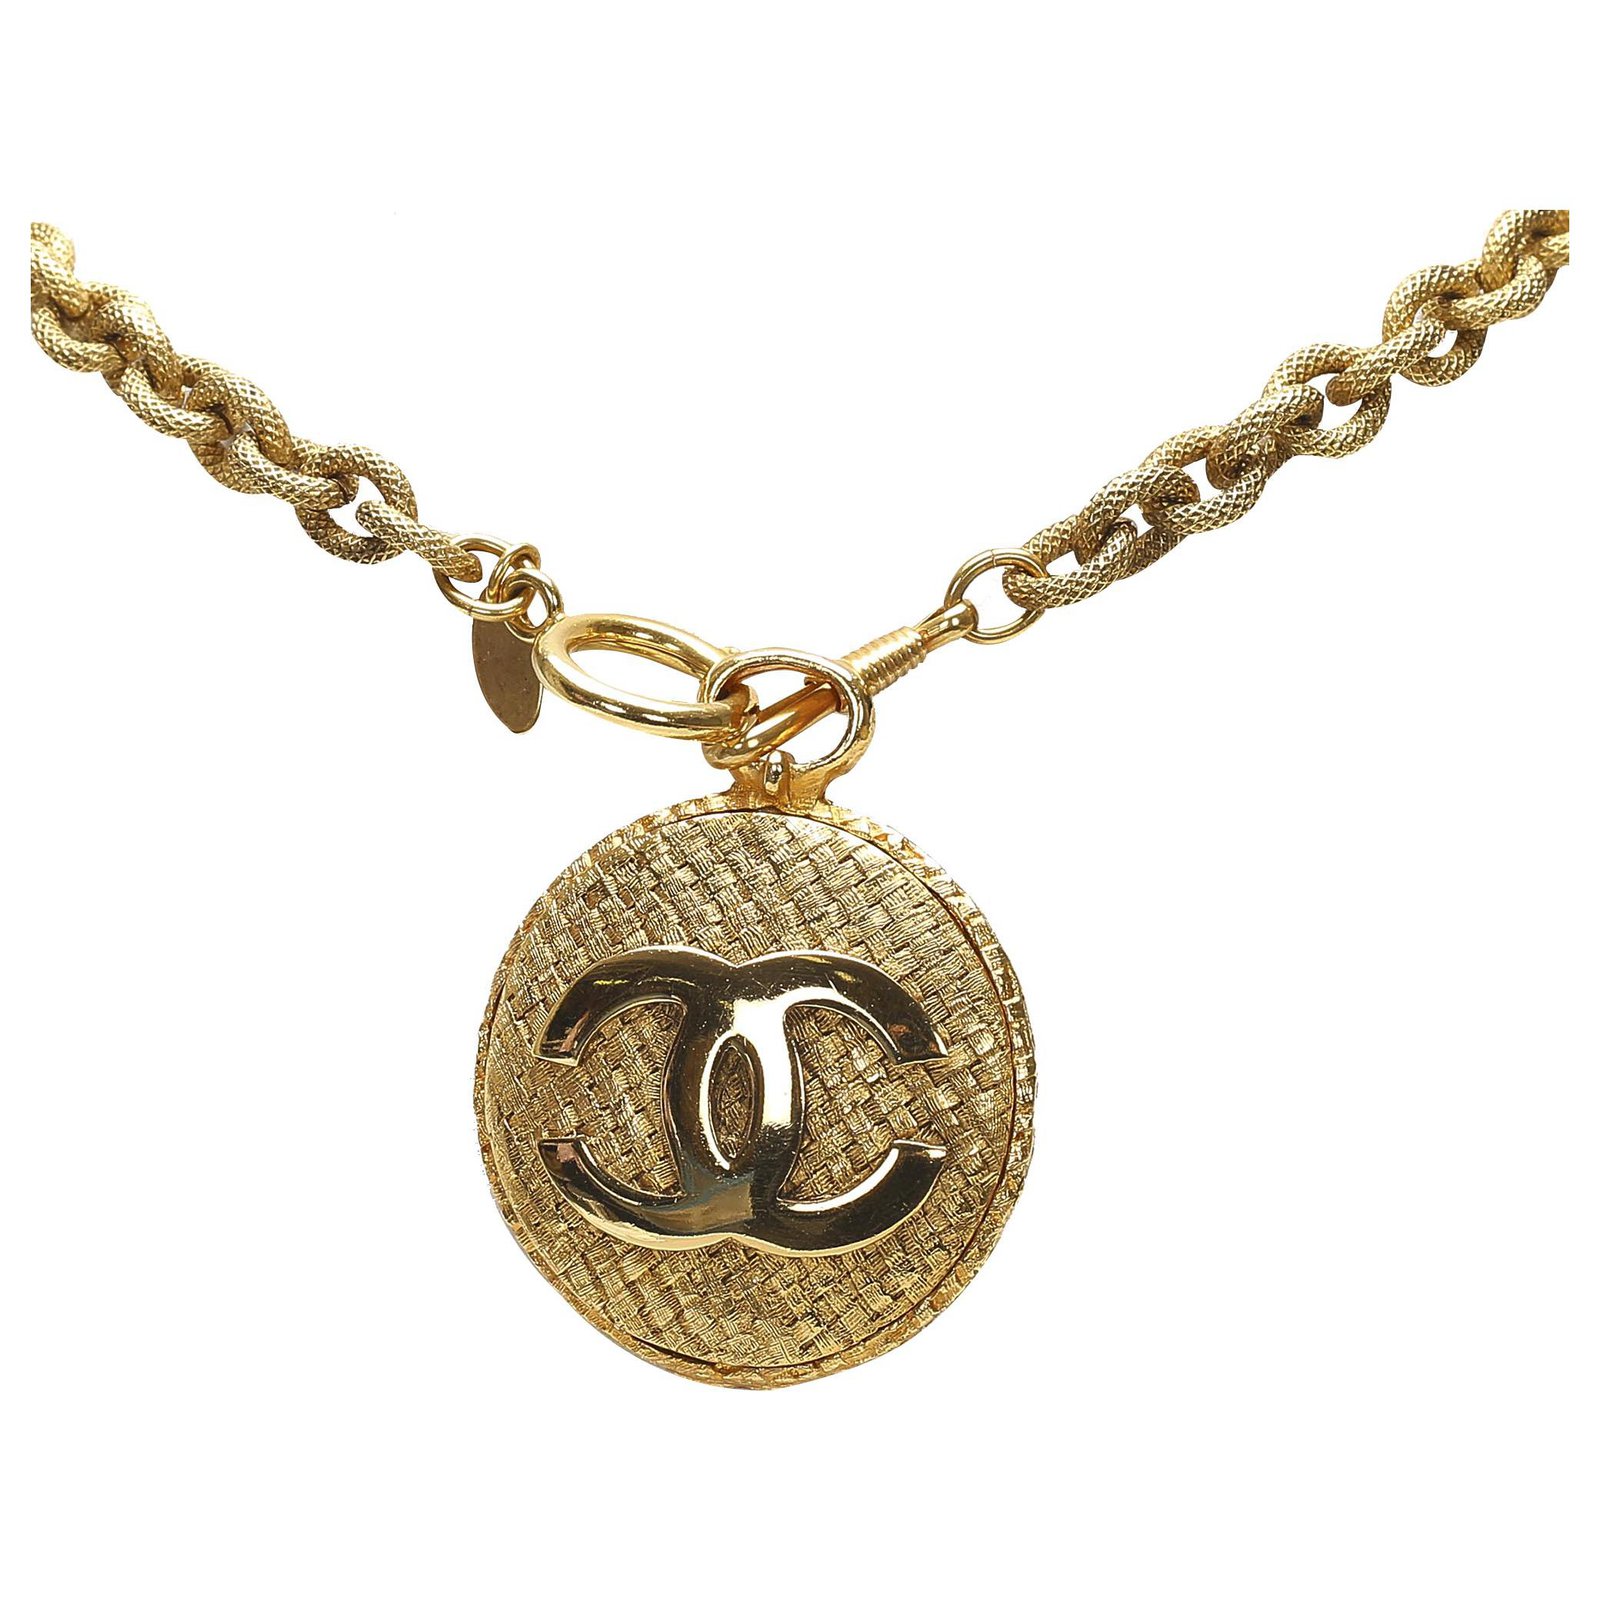 Sold at Auction: Vintage Chanel gold tone mirror pendant charm